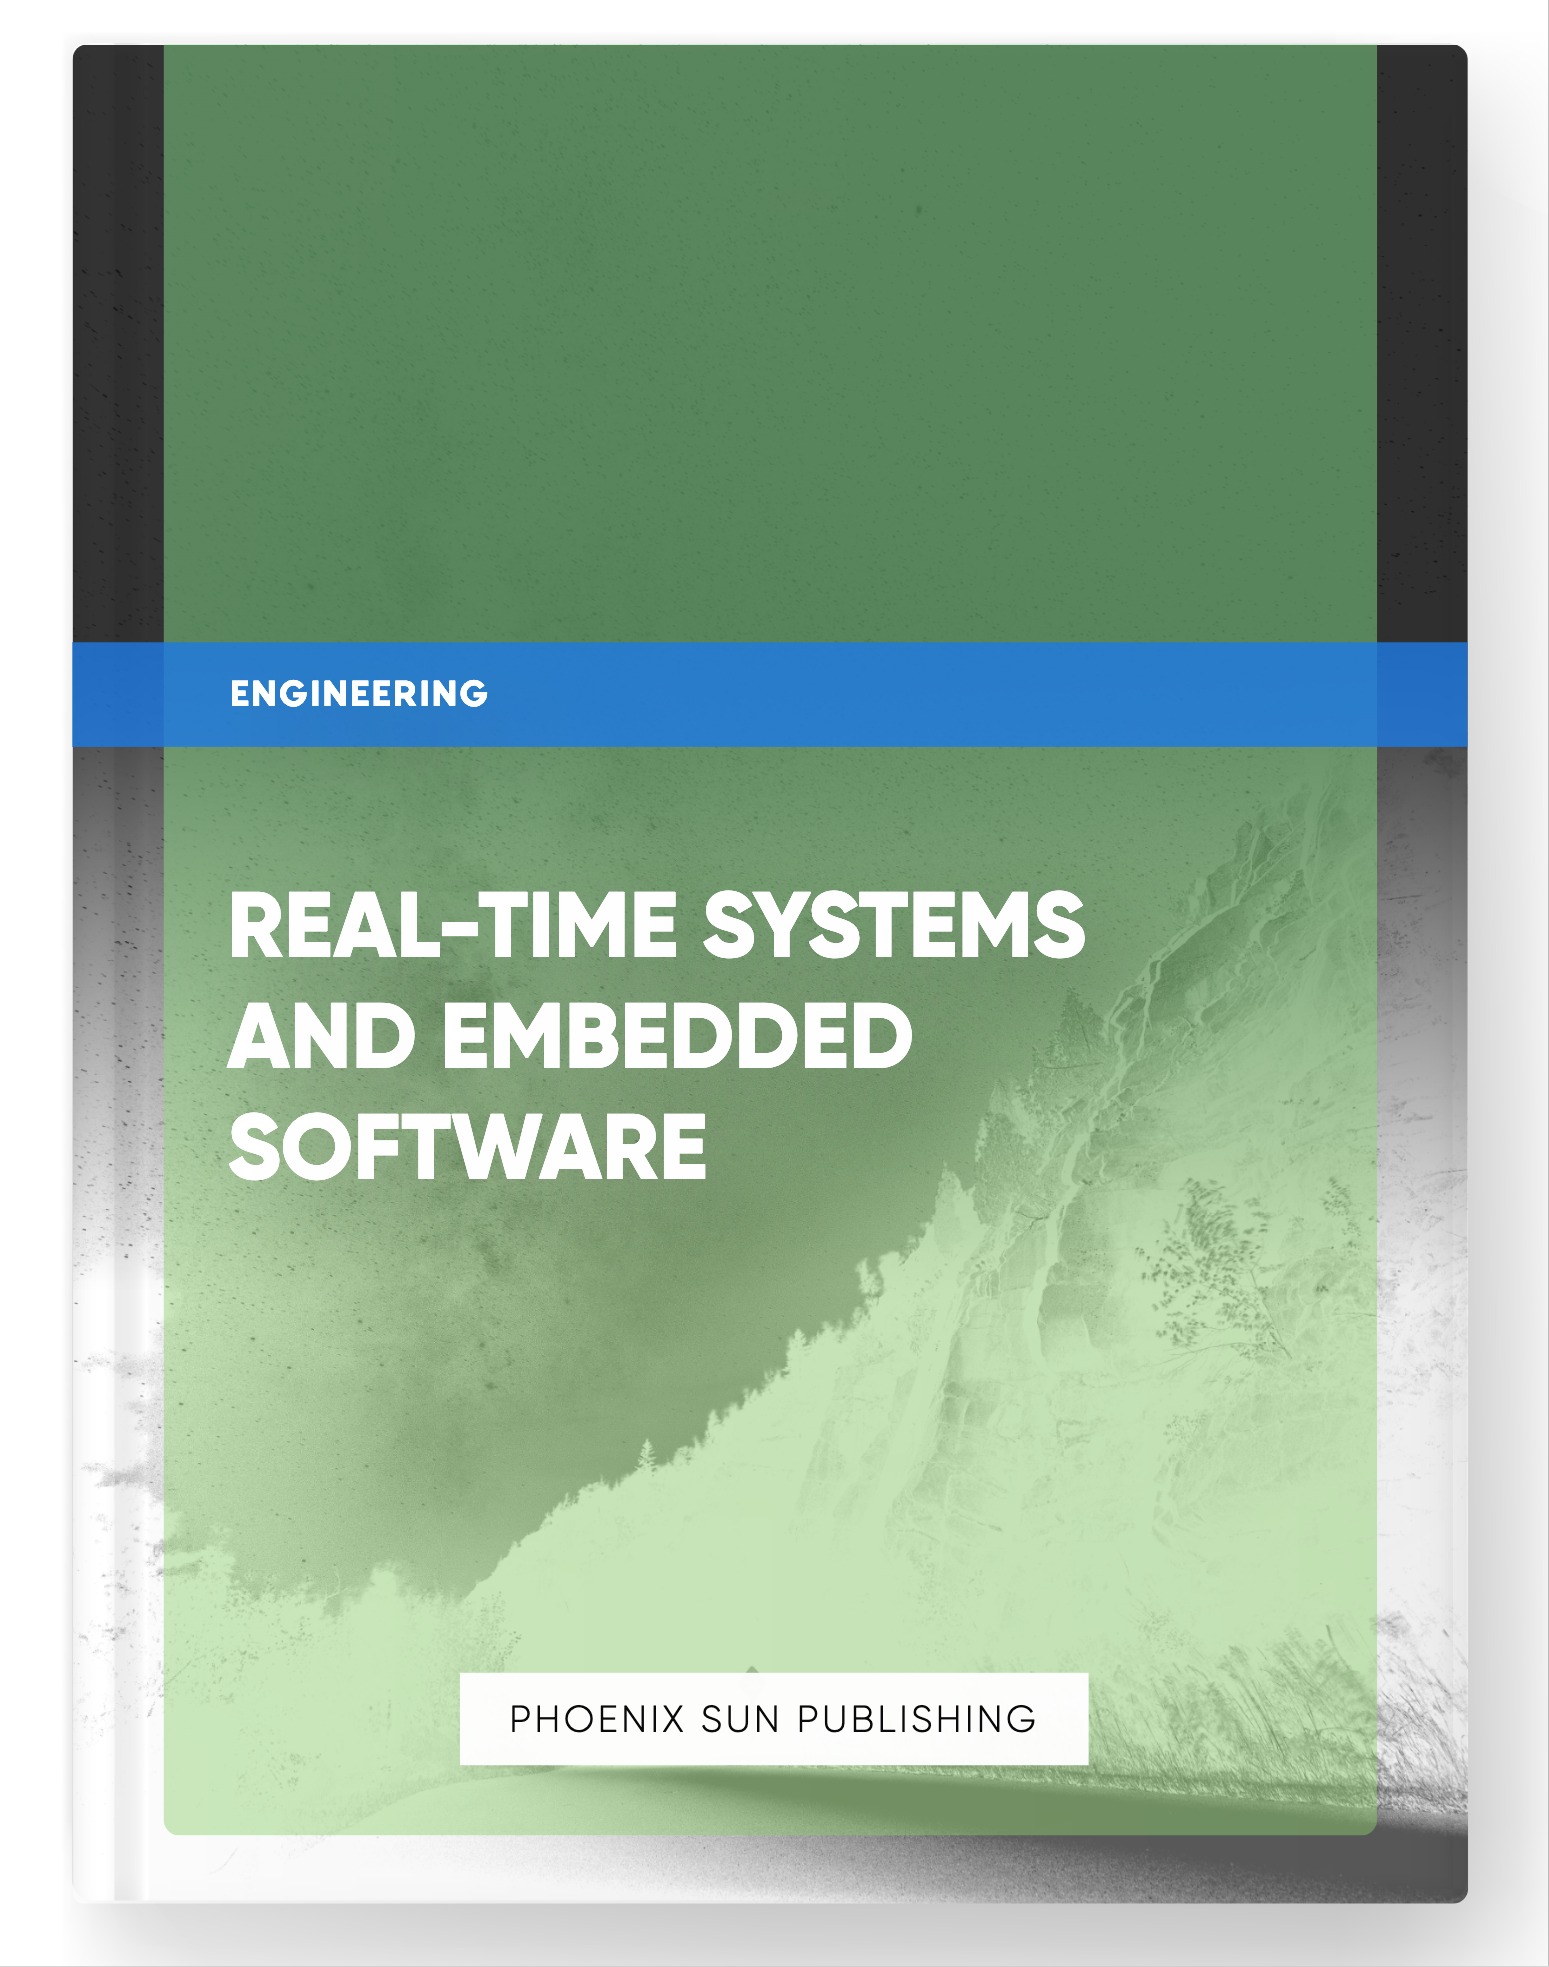 Real-Time Systems and Embedded Software